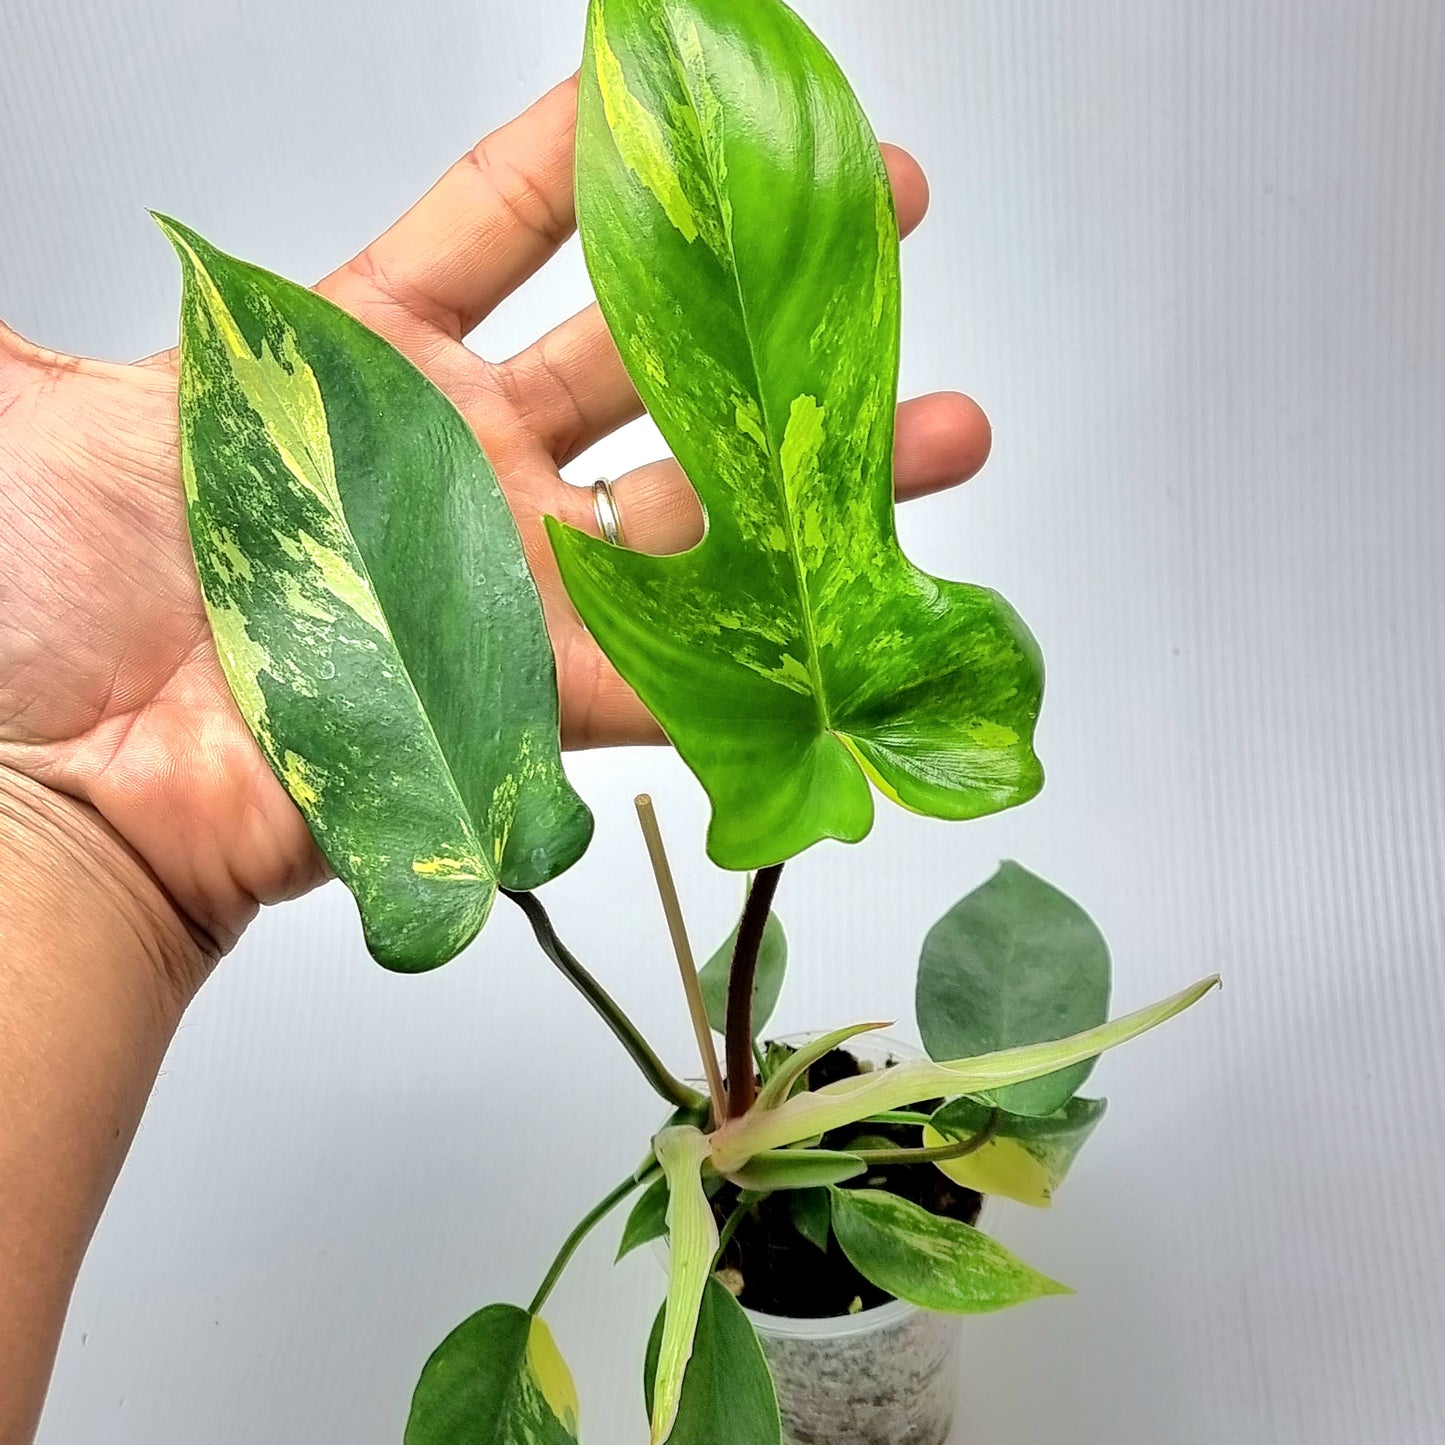 Philodendron Florida Beauty for sale in Perth Australia